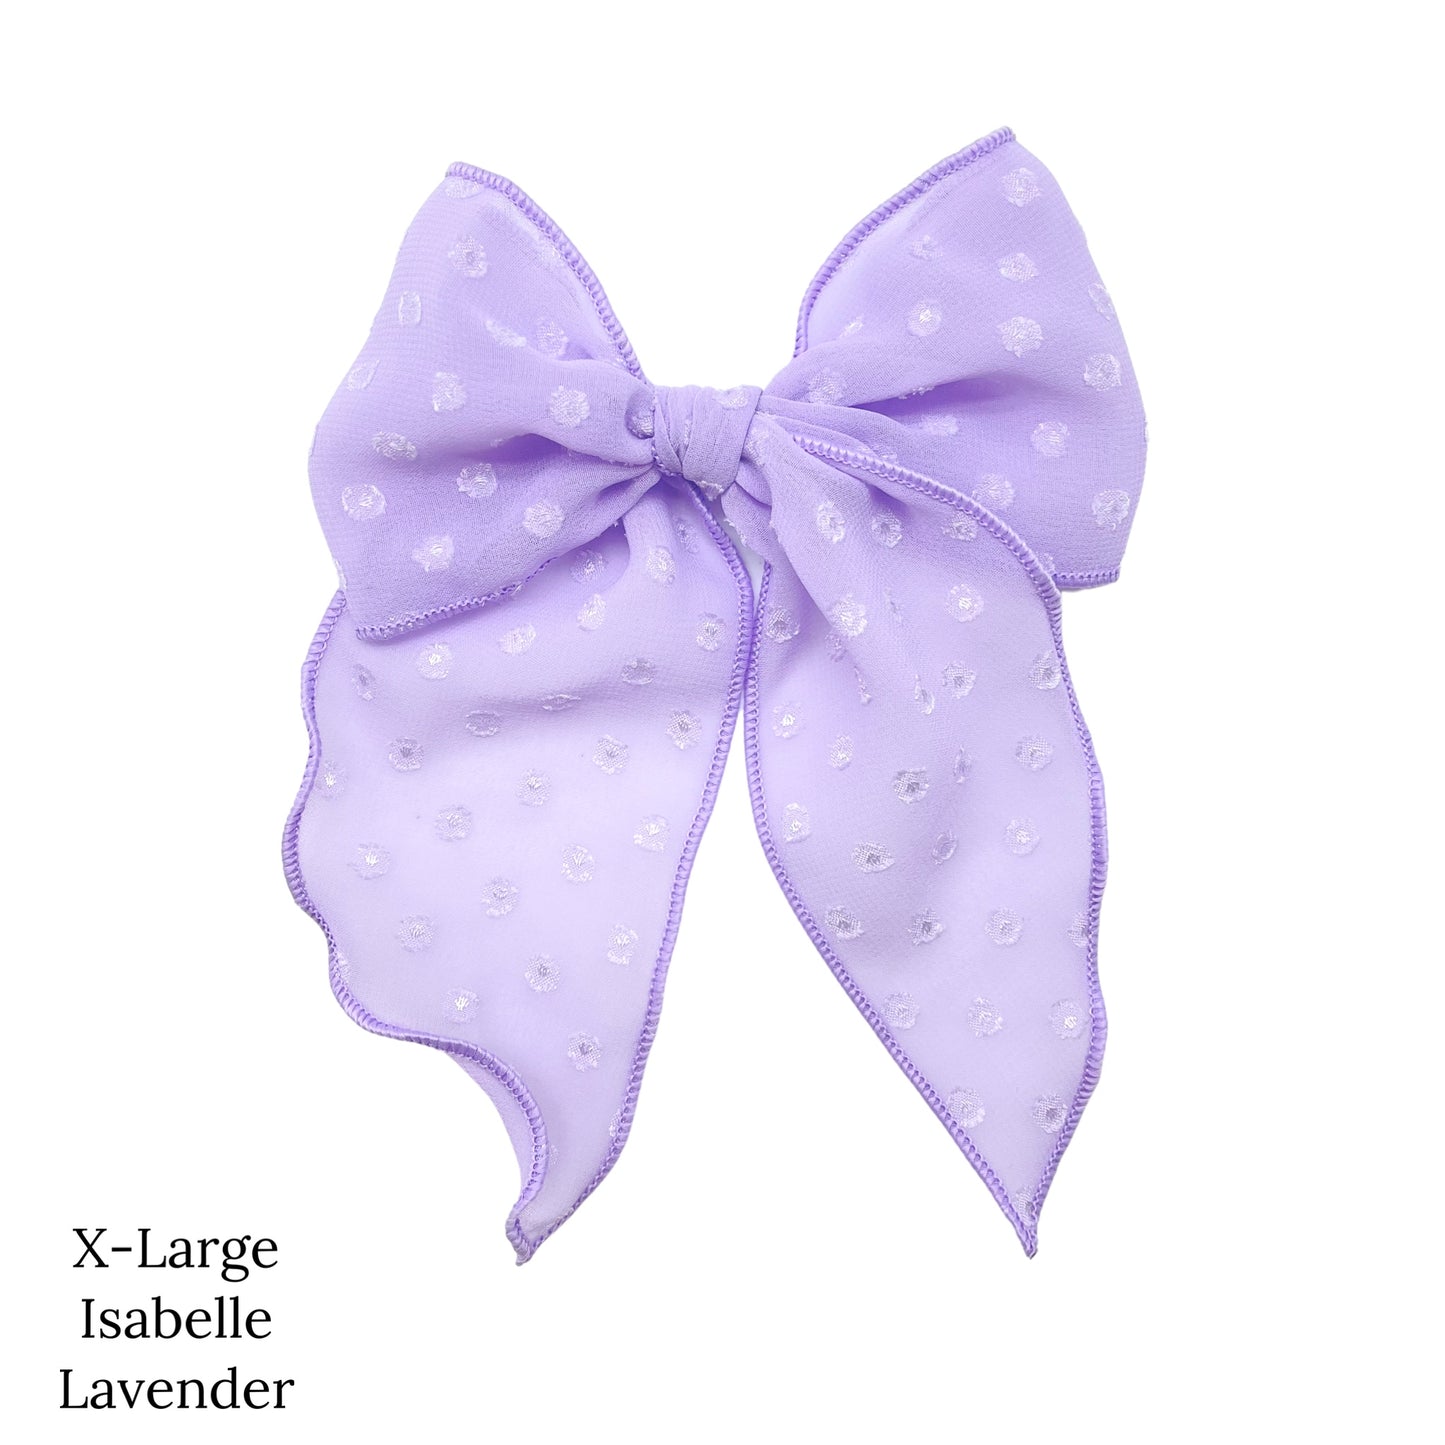 Spring frayed dot fabric bow strips. Lavender colored X-large serger style bow strip.